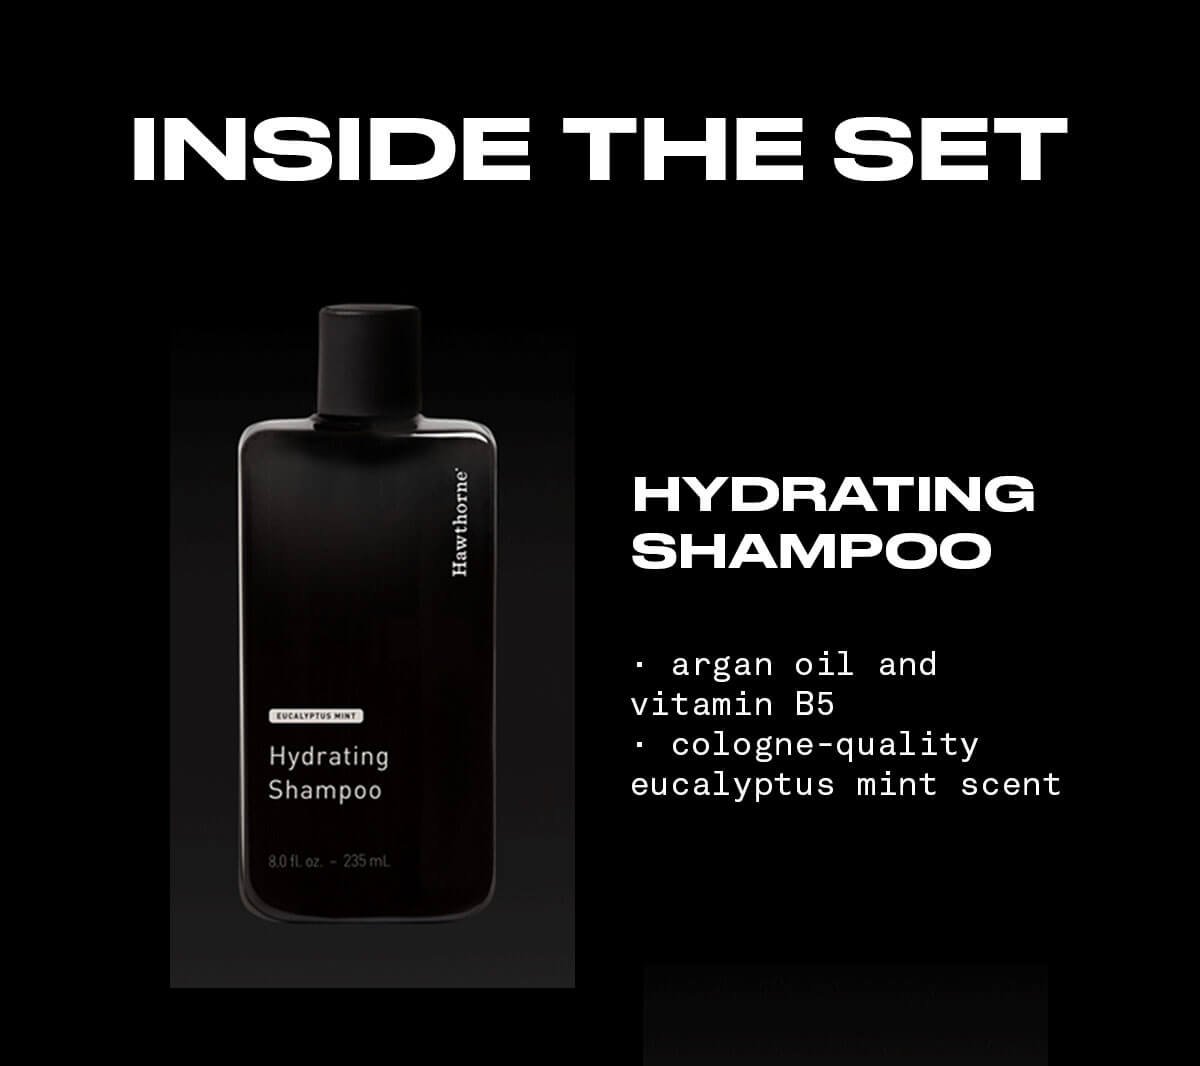 INSIDE THE SET HYDRATING SHAMPOO . argan oil and vitamin B5 . cologne-quality eucalyptus mint scent